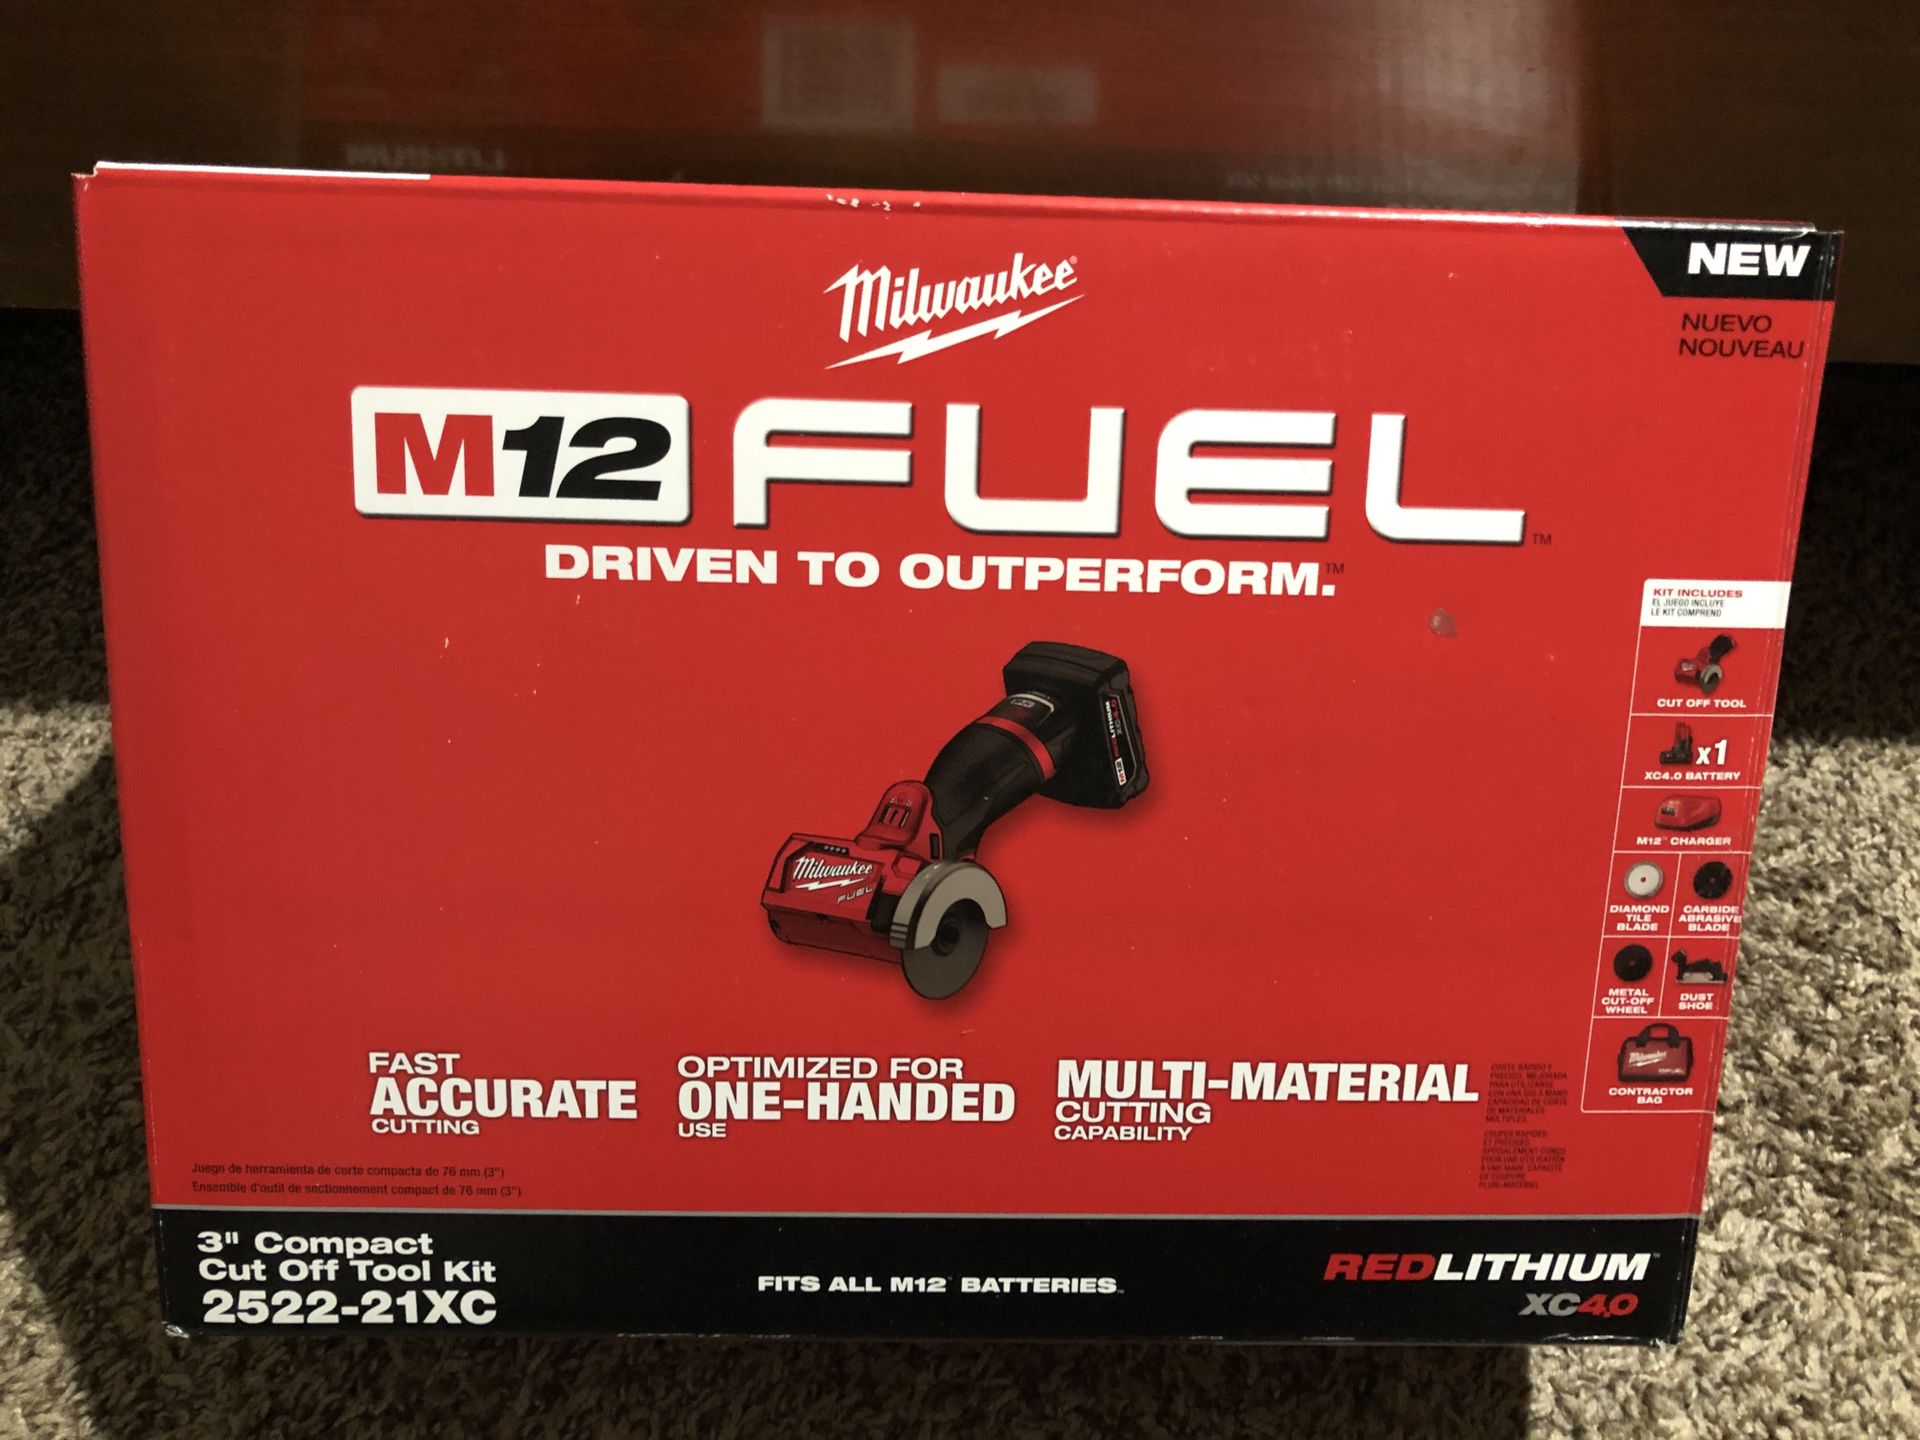 BRAND NEW UNOPENED MILWAUKEE FUEL WITH 4.0 BATTERY RED LITHIUM M12 CUT-OFF TOOL